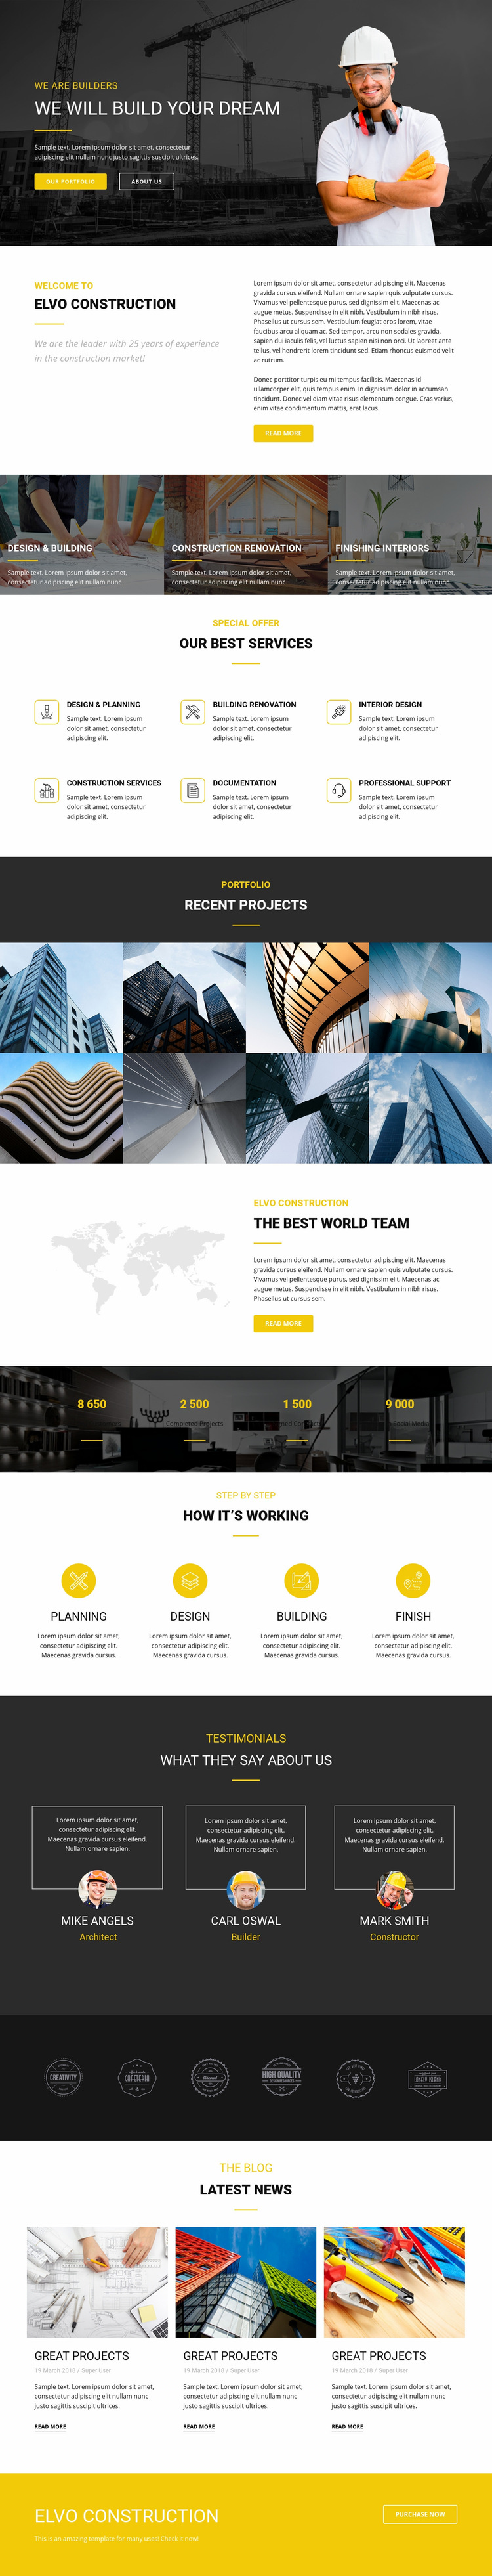 Build your dream industrial Web Page Design